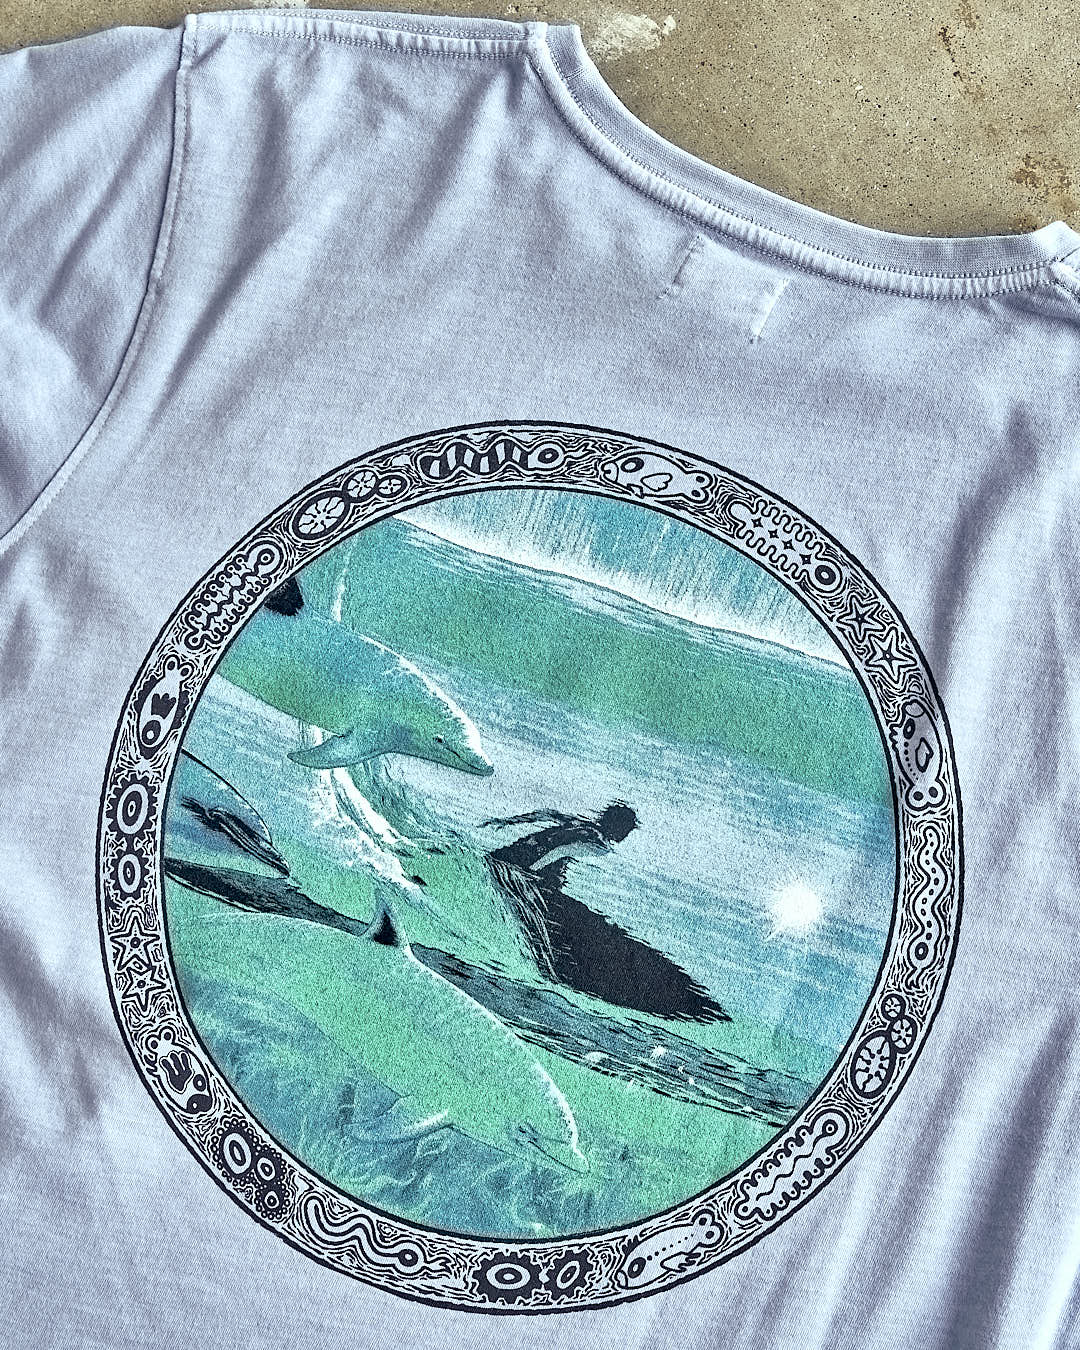 A Dolphin - Limited Edition 35 Years T-Shirt with an image of a surfer on it by Saltrock.